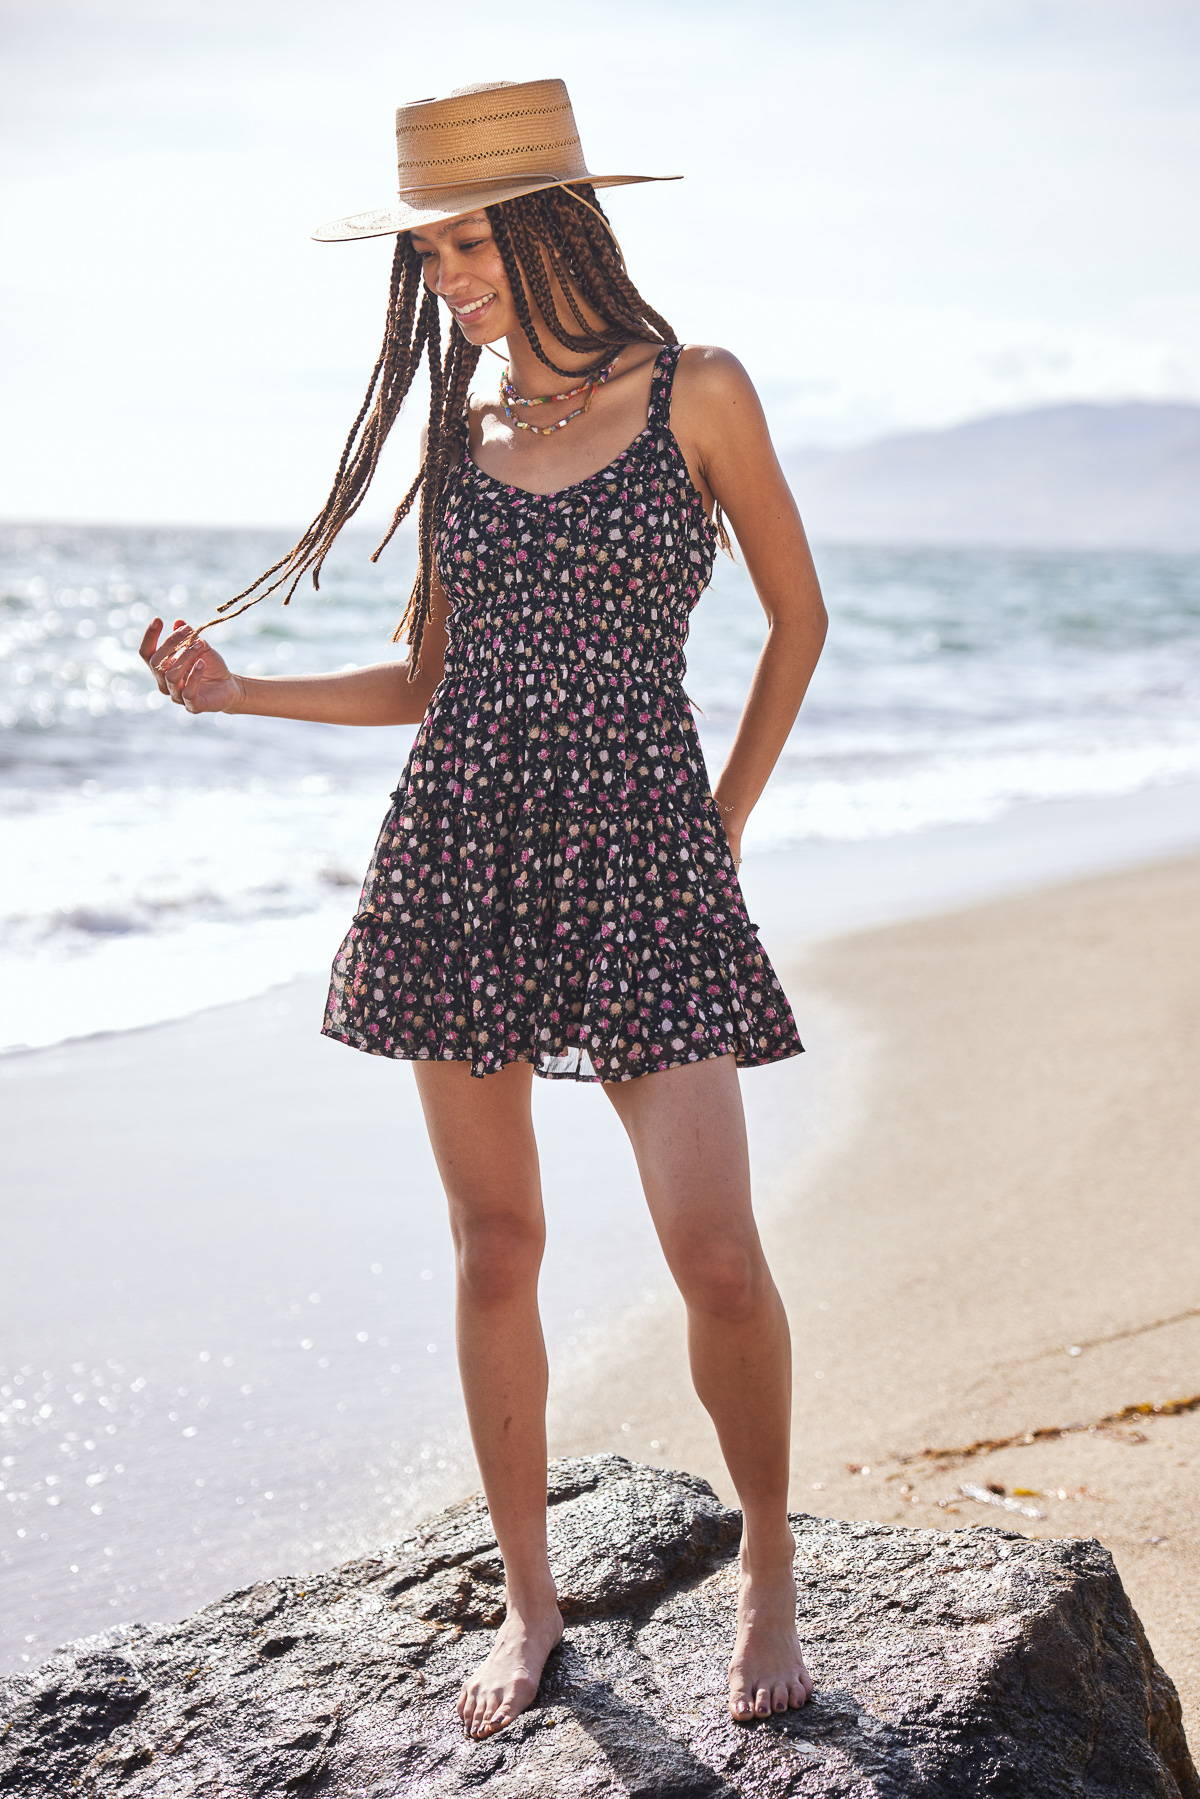 Trixxi sun-kissed summer, girl at oceanside beach sane in ditsy floral tier tank dress.